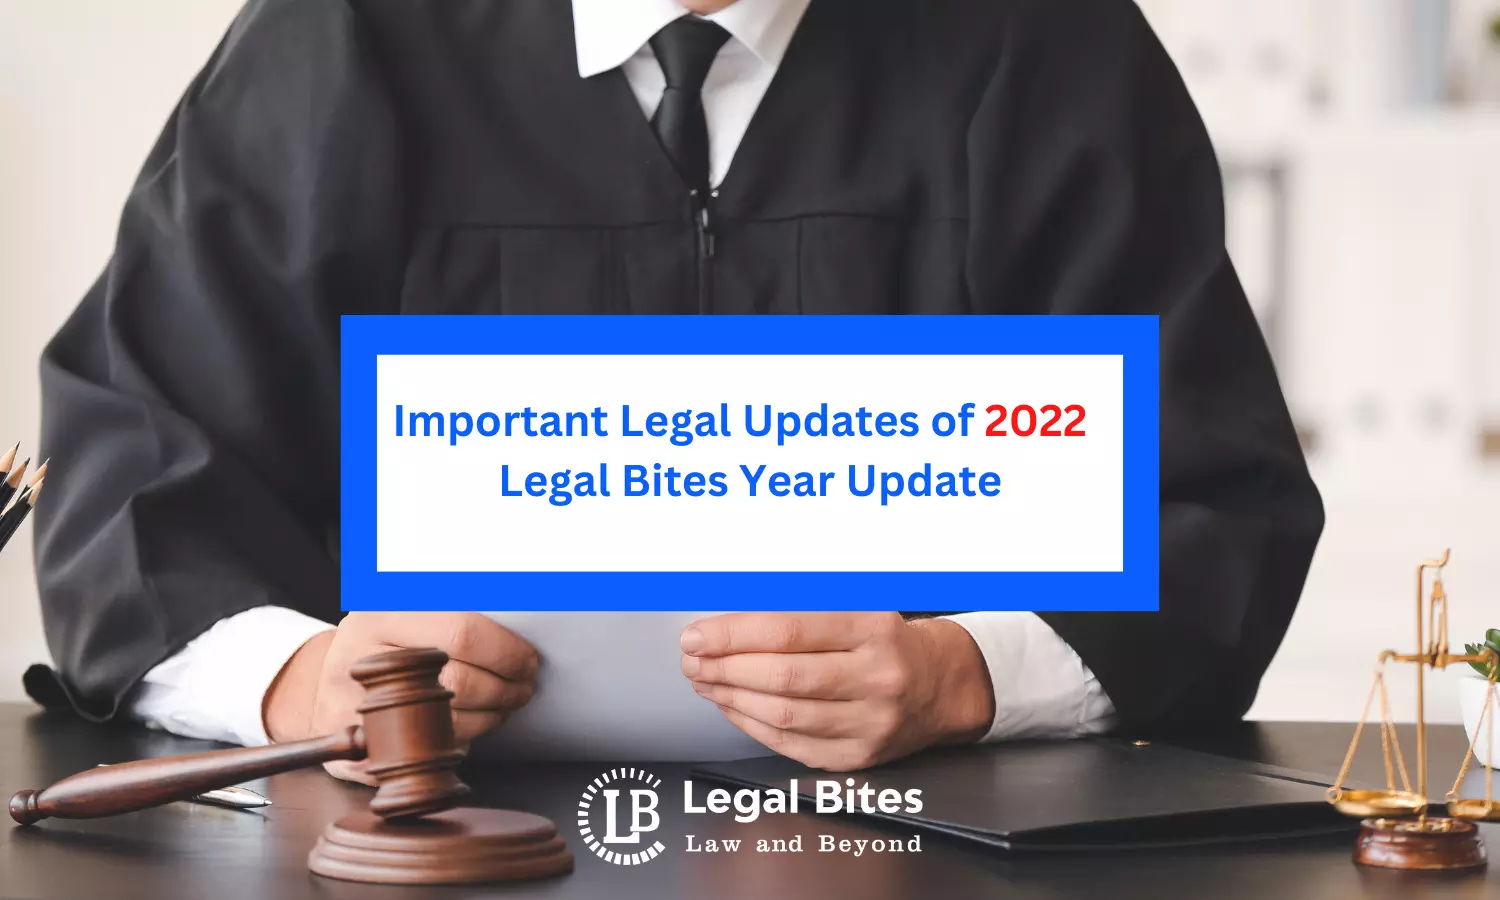 Important Legal Updates of 2022 - Legal Bites Year Update